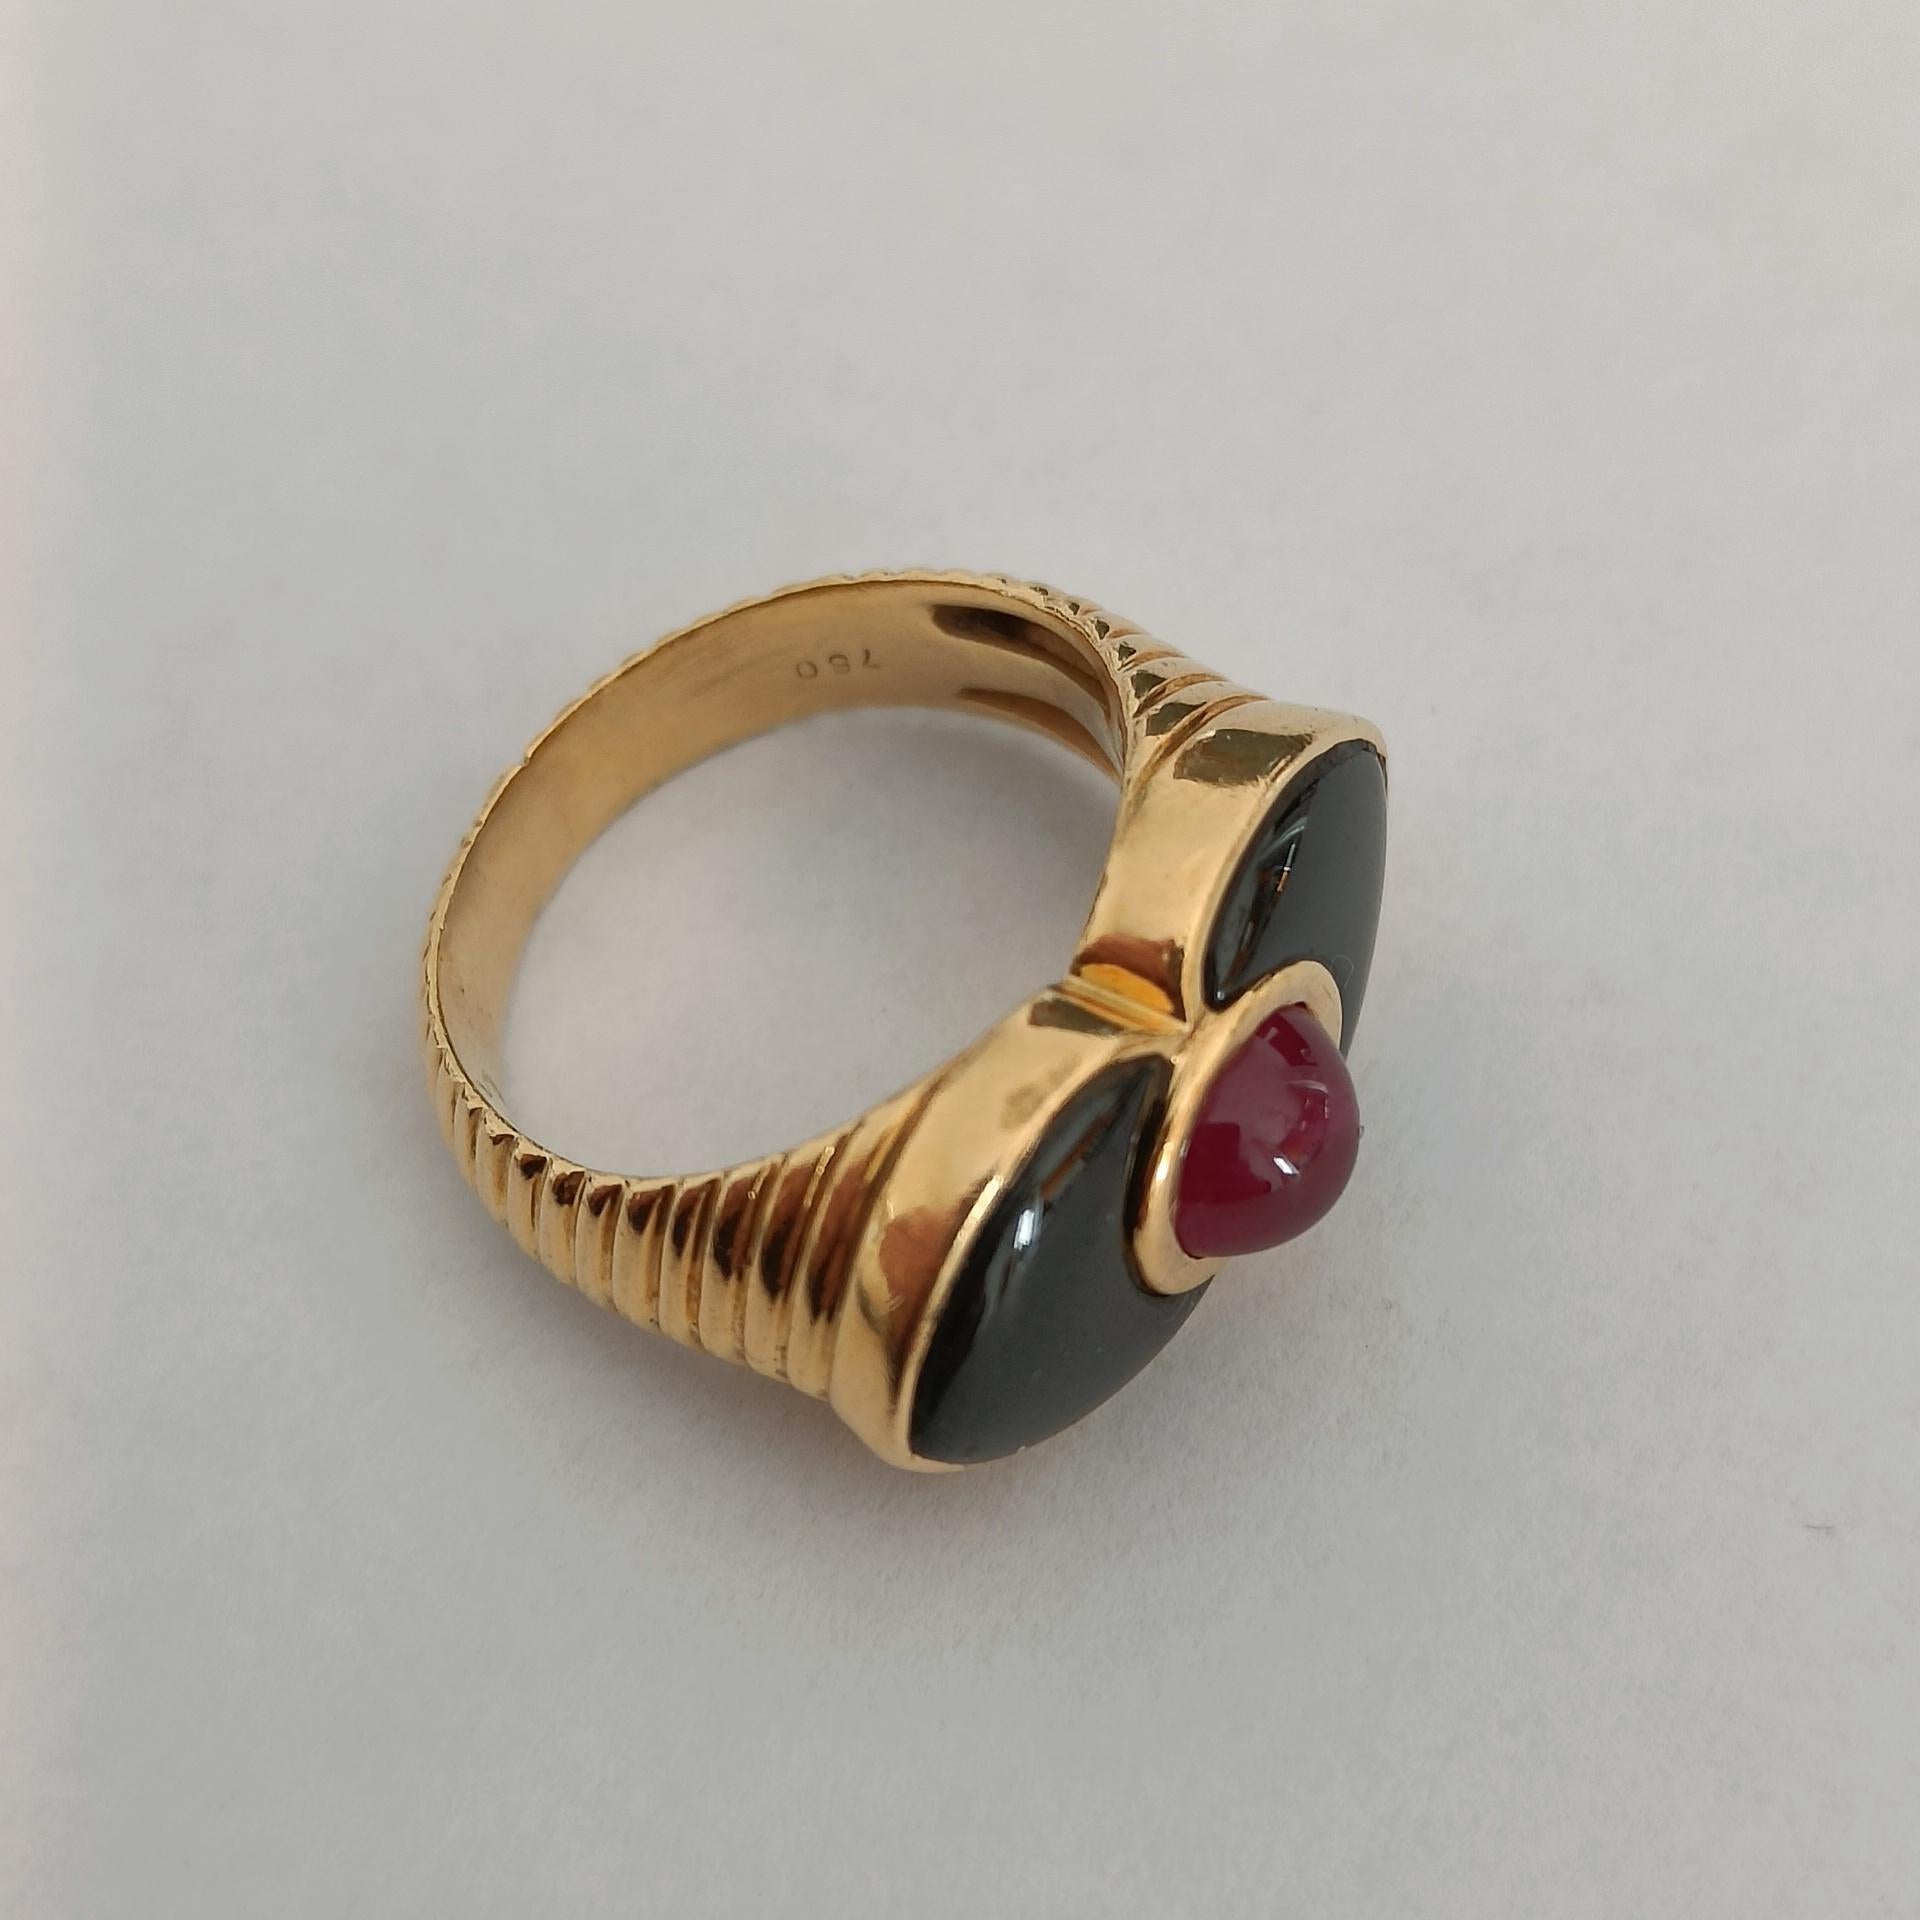 A 18k godronné gold ring adorned with a ruby cabochon framed by two ogival onyx plaques. Beautiful floral composition. Stamped 750.

Size: FR 50 - US 5 (approx)
Weight 8.10 grams

Very good condition